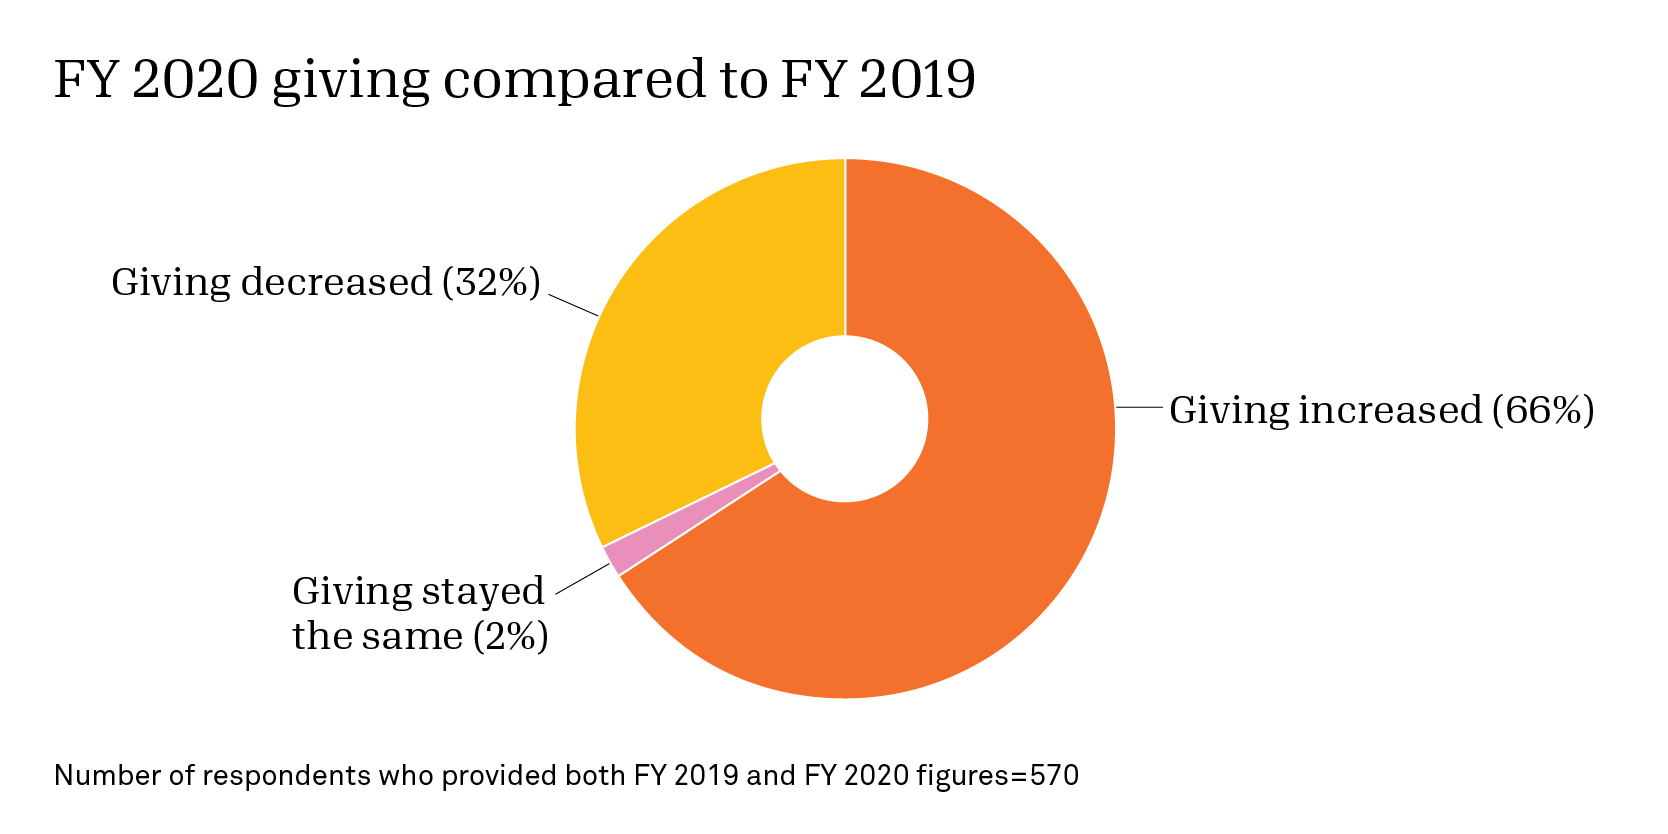 Pie chart of FY 2020 giving compared to FY 2019